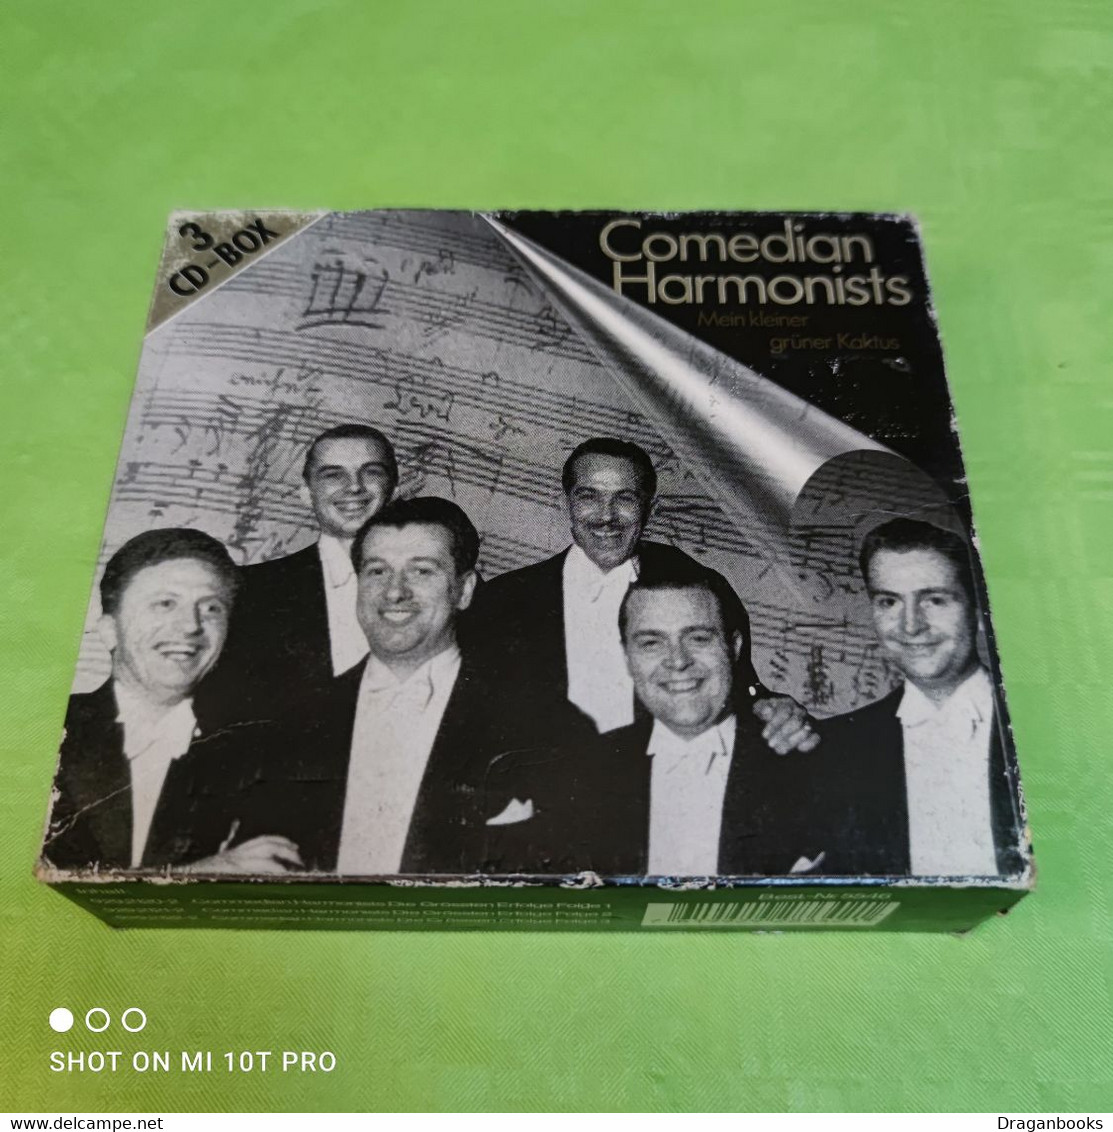 Comedian Marmonists - 3 CD Box - Other - German Music